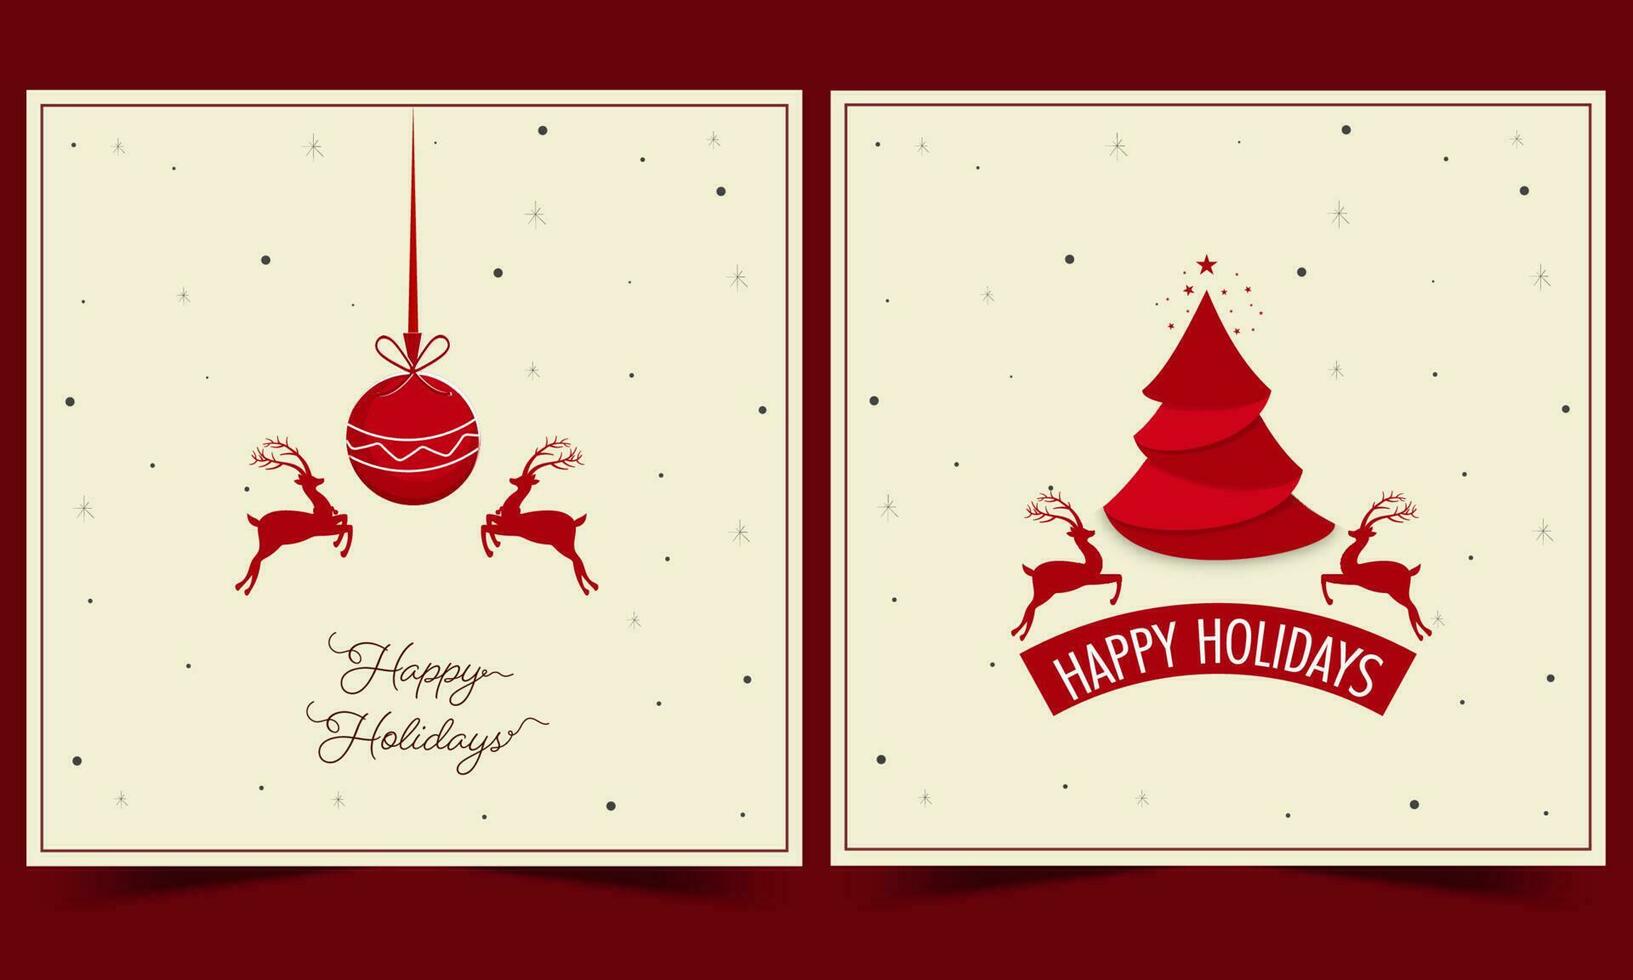 Happy Holidays Greeting Cards With Paper Style Xmas Tree, Silhouette Reindeer And Baubles Hang On Pastel Yellow Background. vector